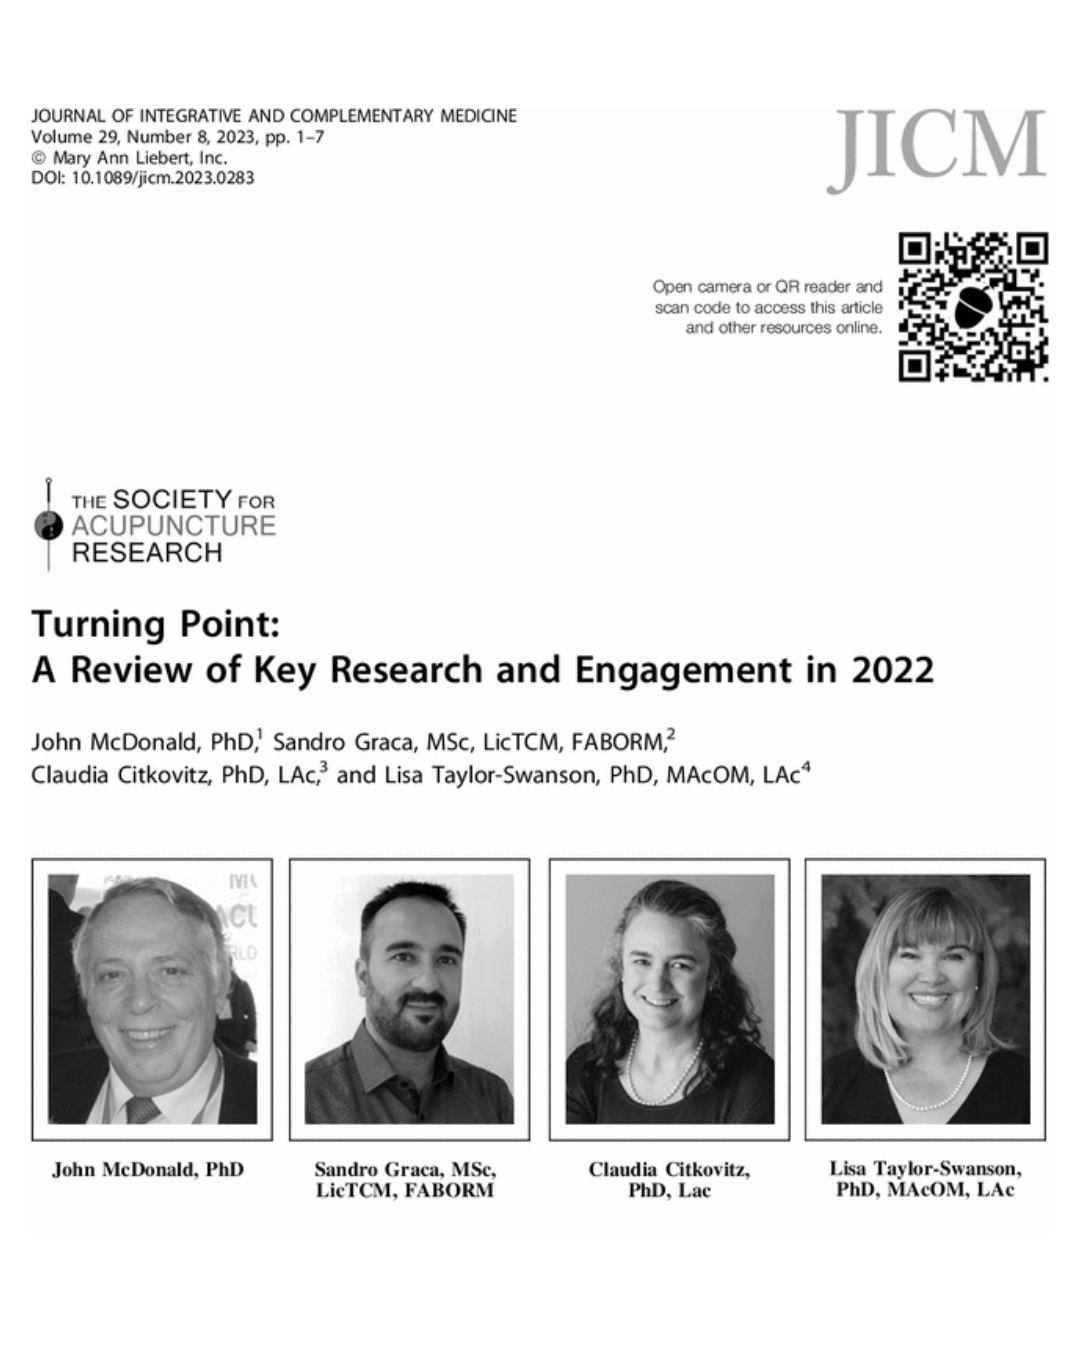 Turning Point: A Review of Key Research and Engagement in 2022